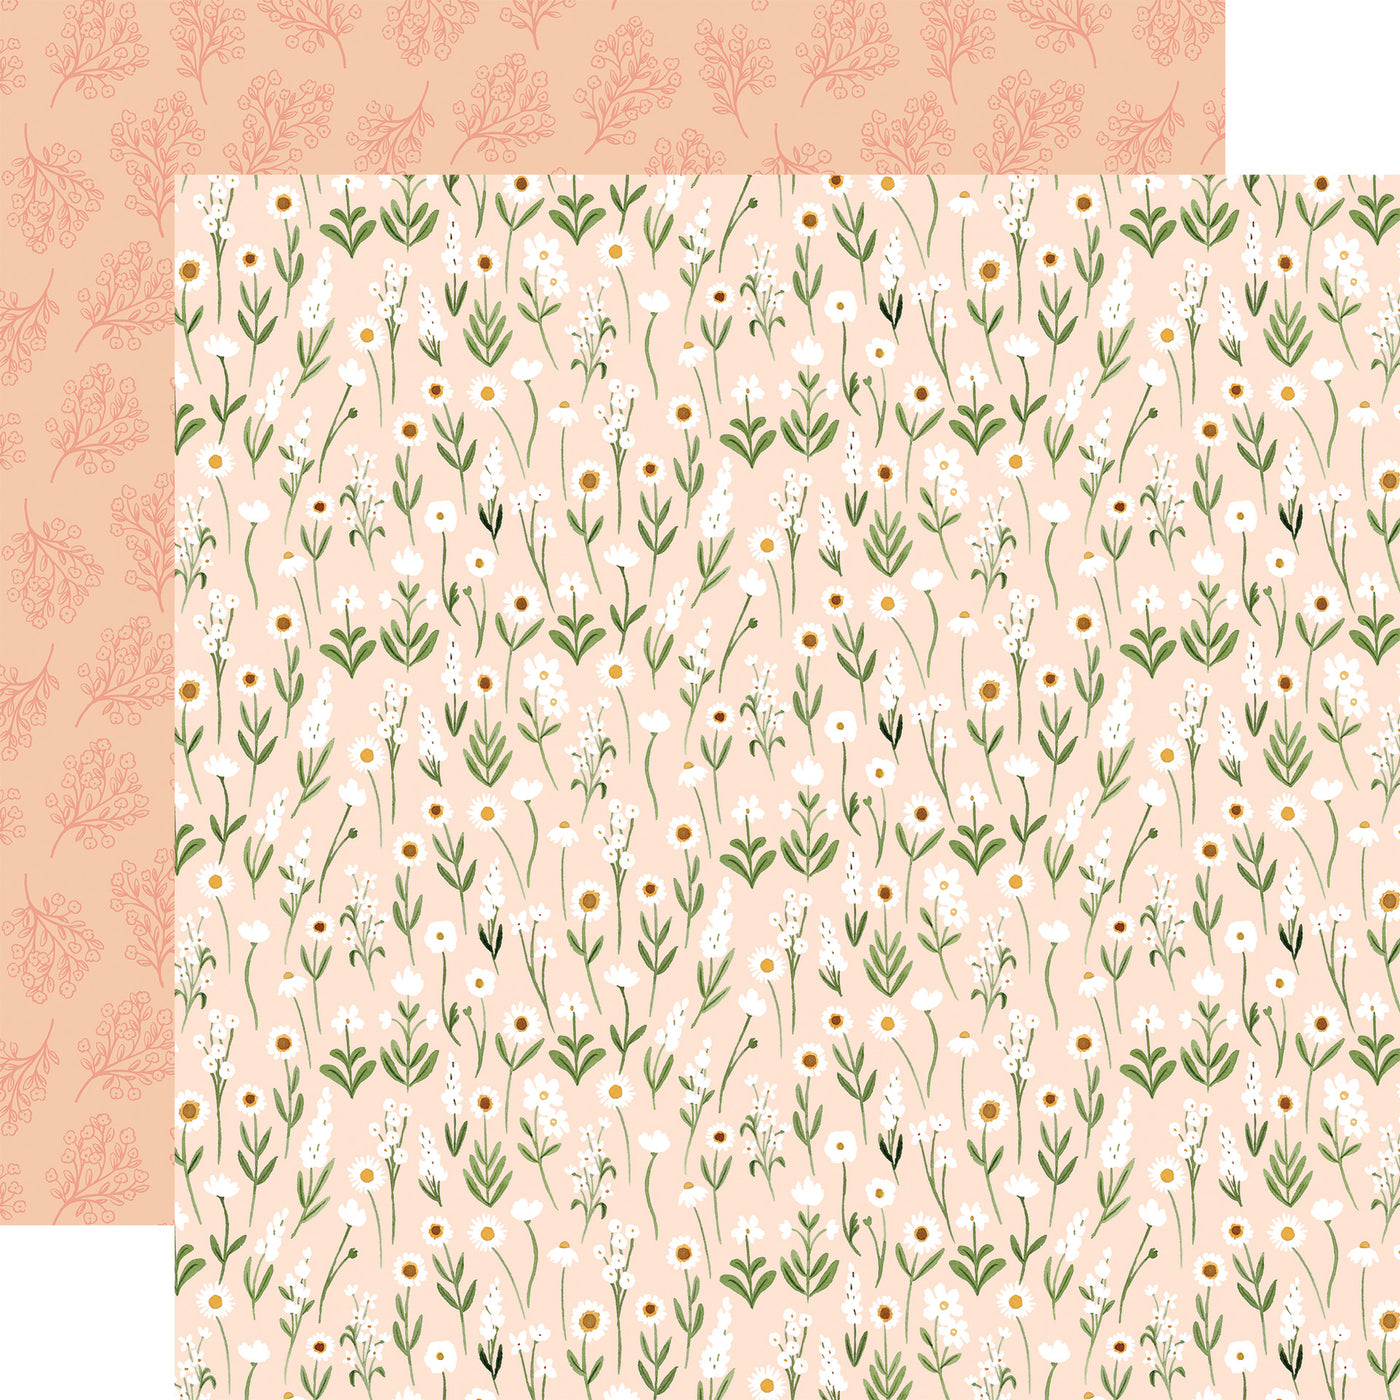 12x12 double-sided patterned paper - (sweet white daisies with green stems on a pale peach background with peach floral pattern reverse) - from Carta Bella Paper